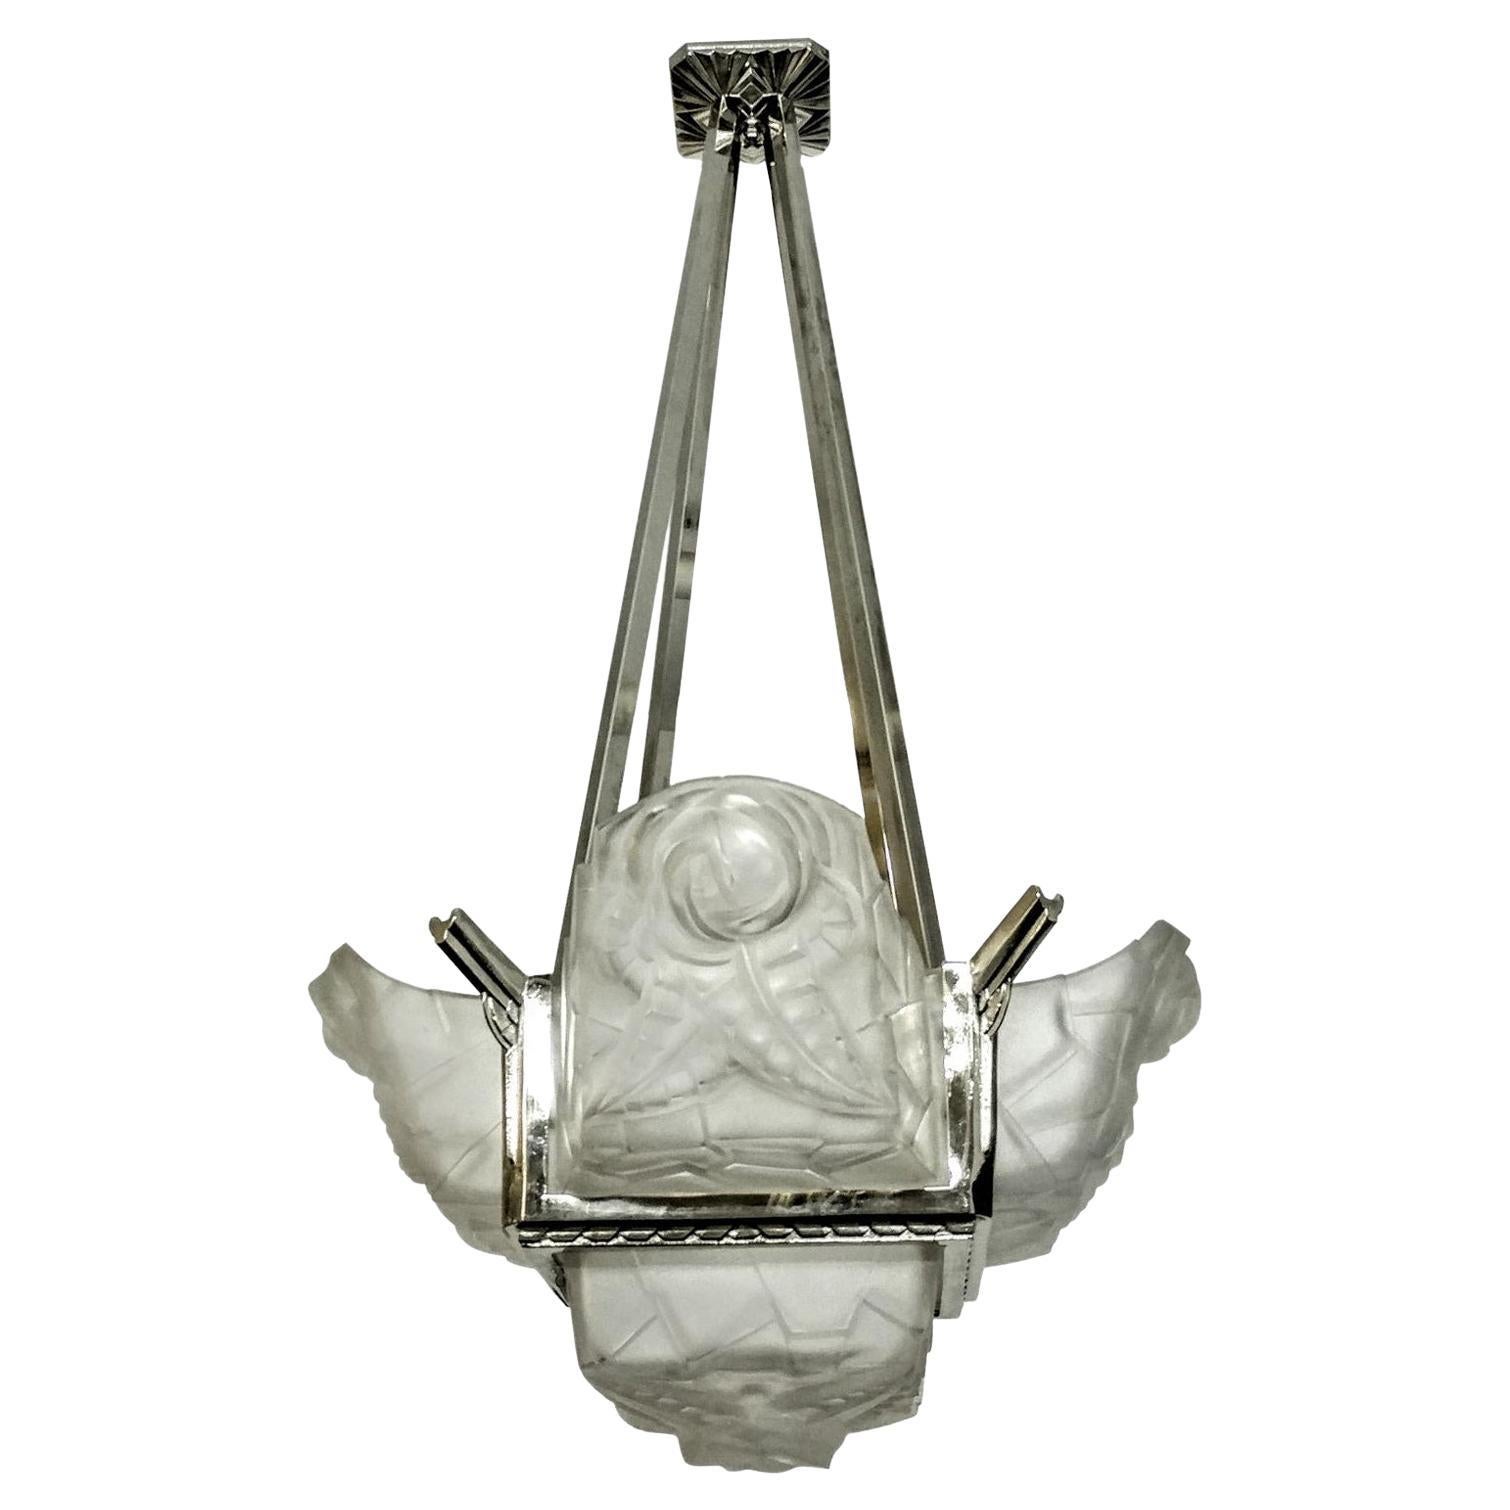 French Art Deco Pendant Chandelier Signed by Degue For Sale